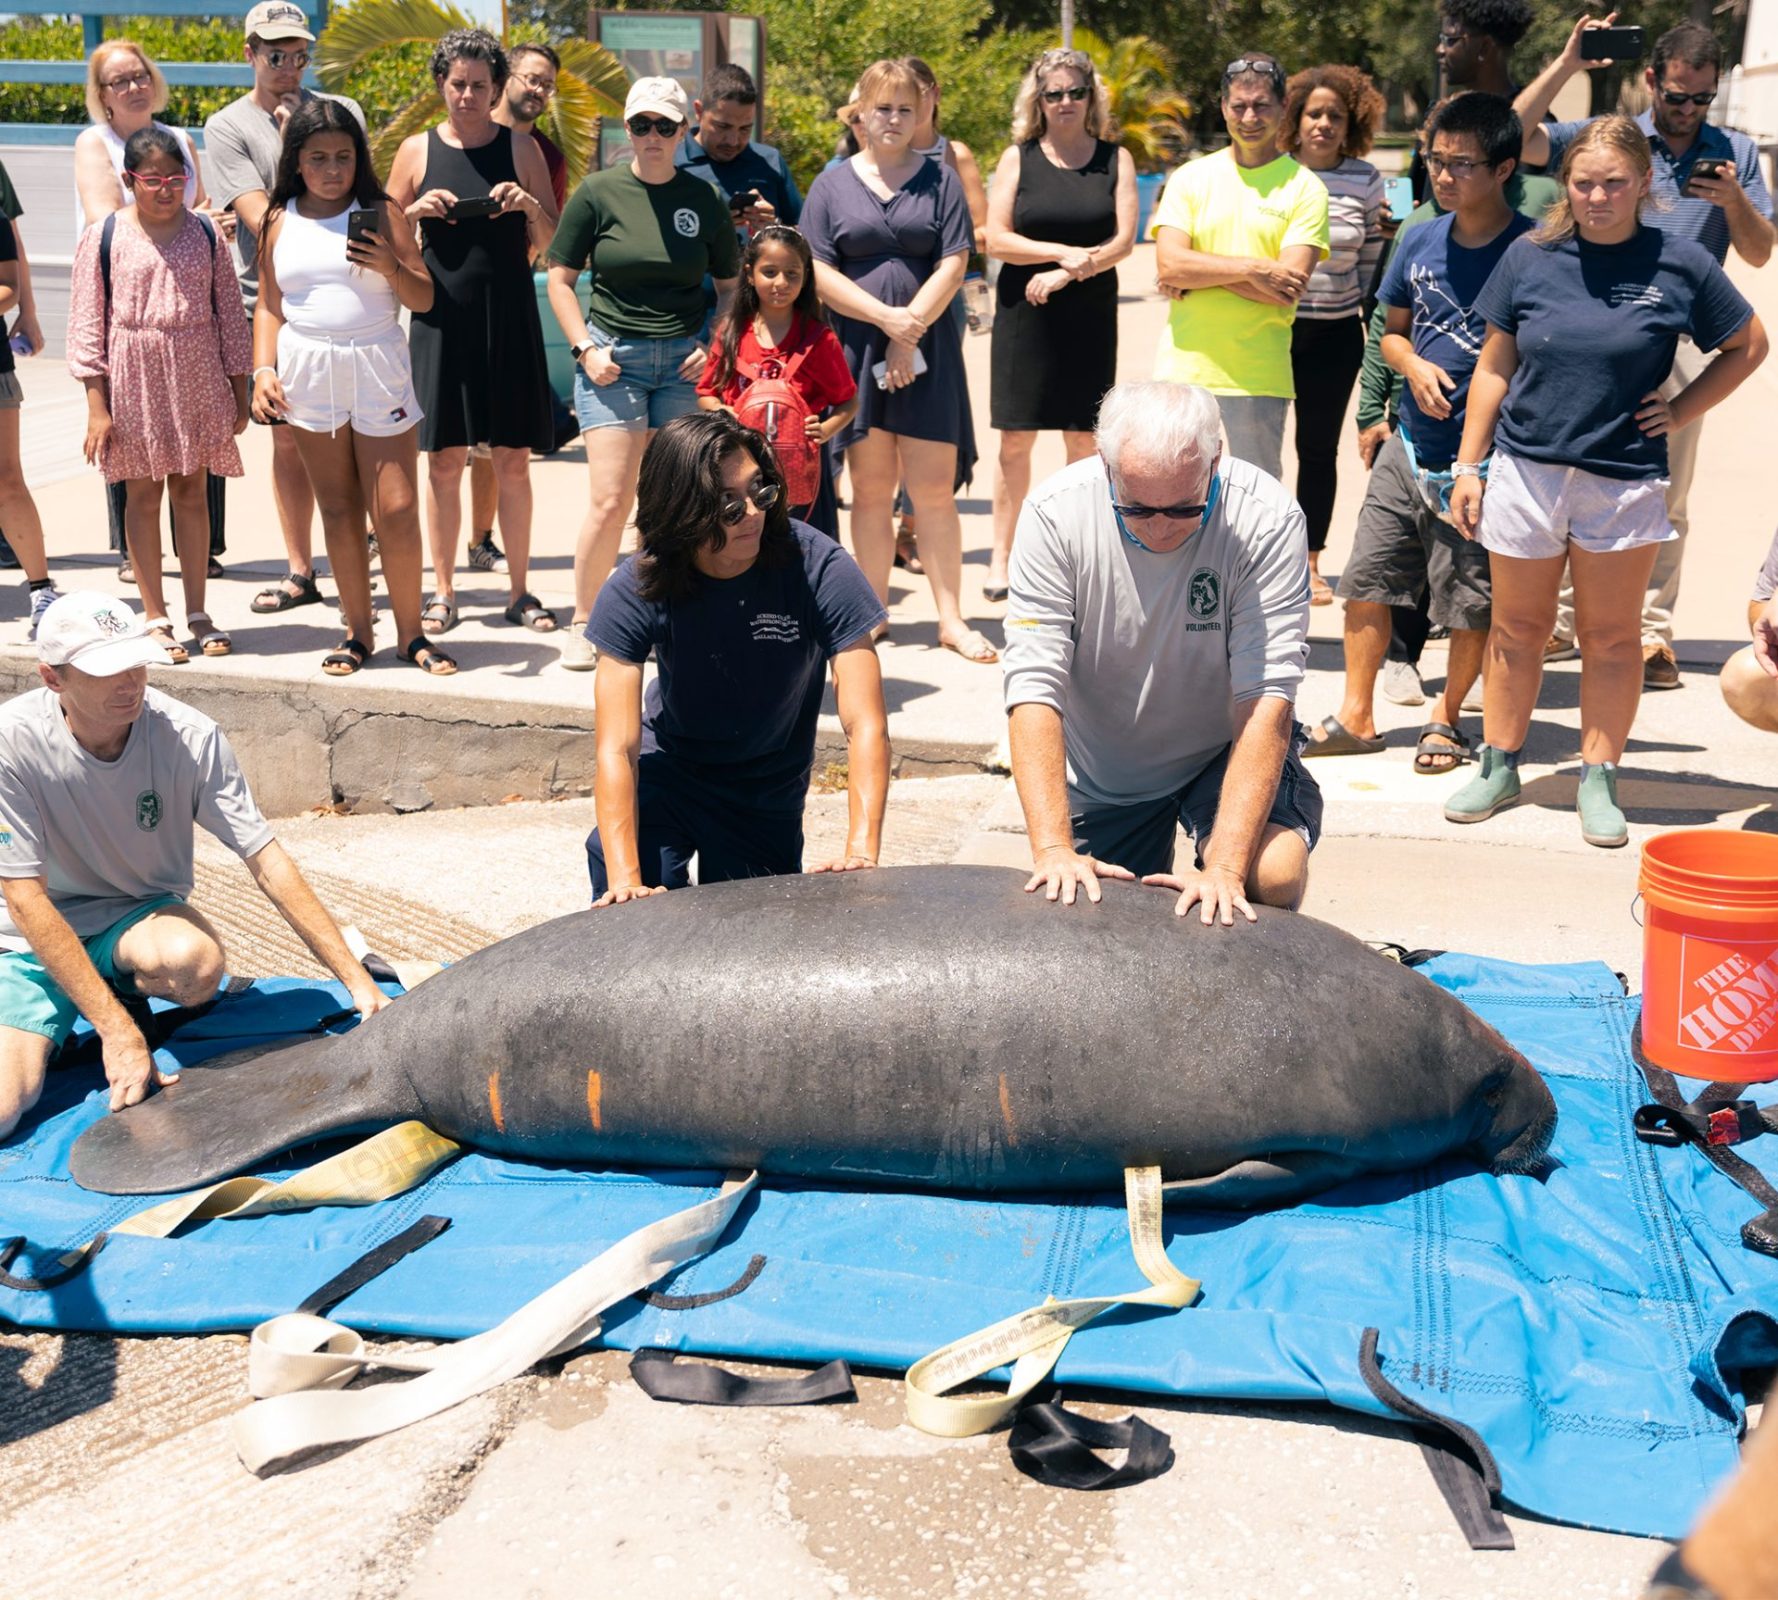 Three volunteers steady Coventry the manatee on a blue tarp in preparation for releasing it in Frenchmen's Creek a few feet away.